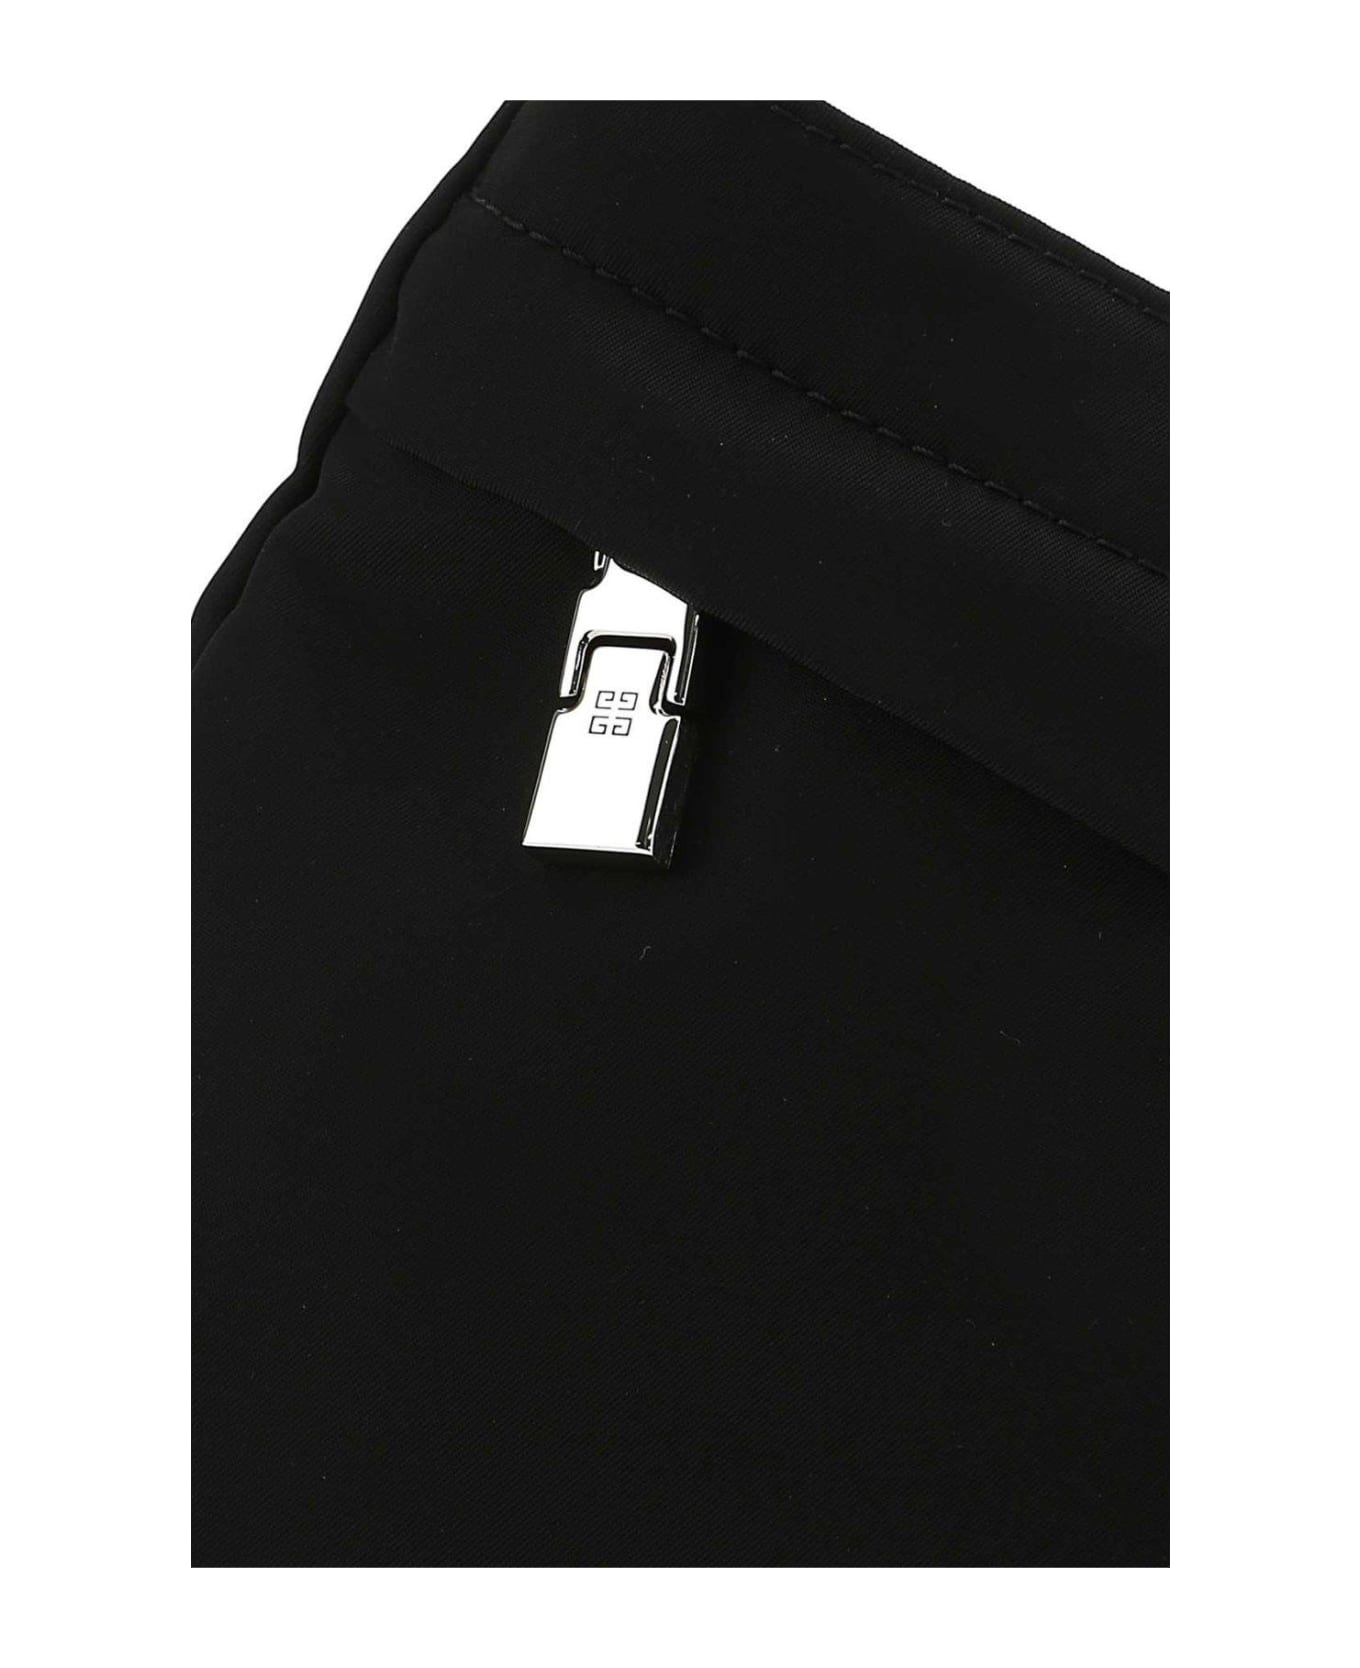 Givenchy Logo Printed Iphone Pouch - Black バッグ